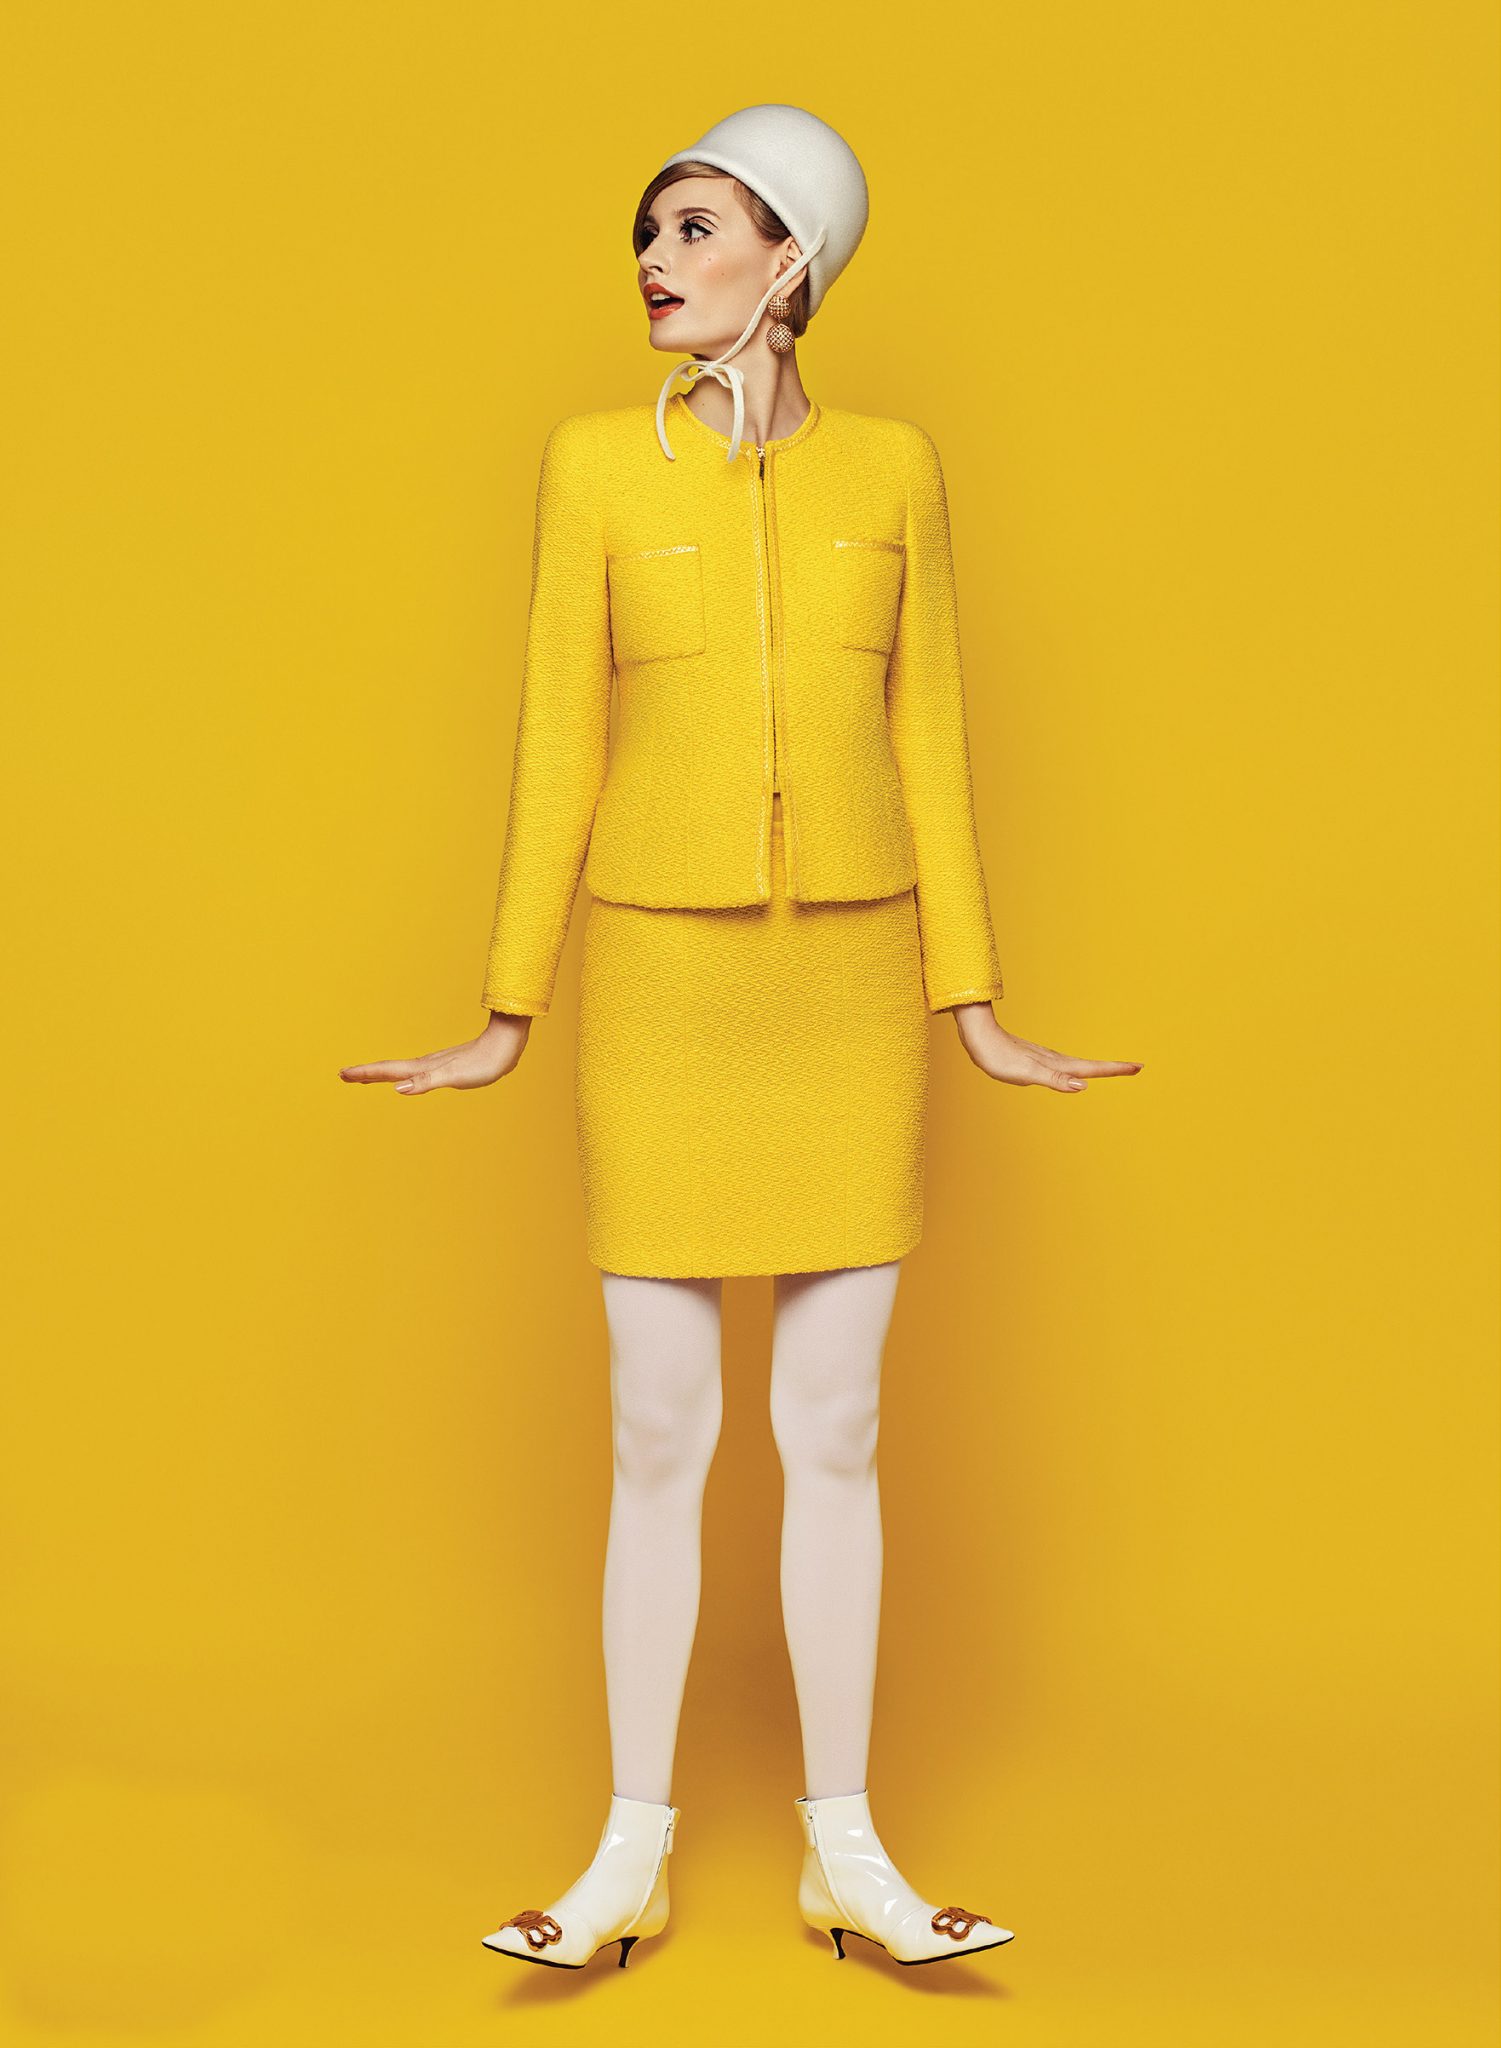 Mellow Yellow — Color Inspiration No.3 | Daily design inspiration for ...